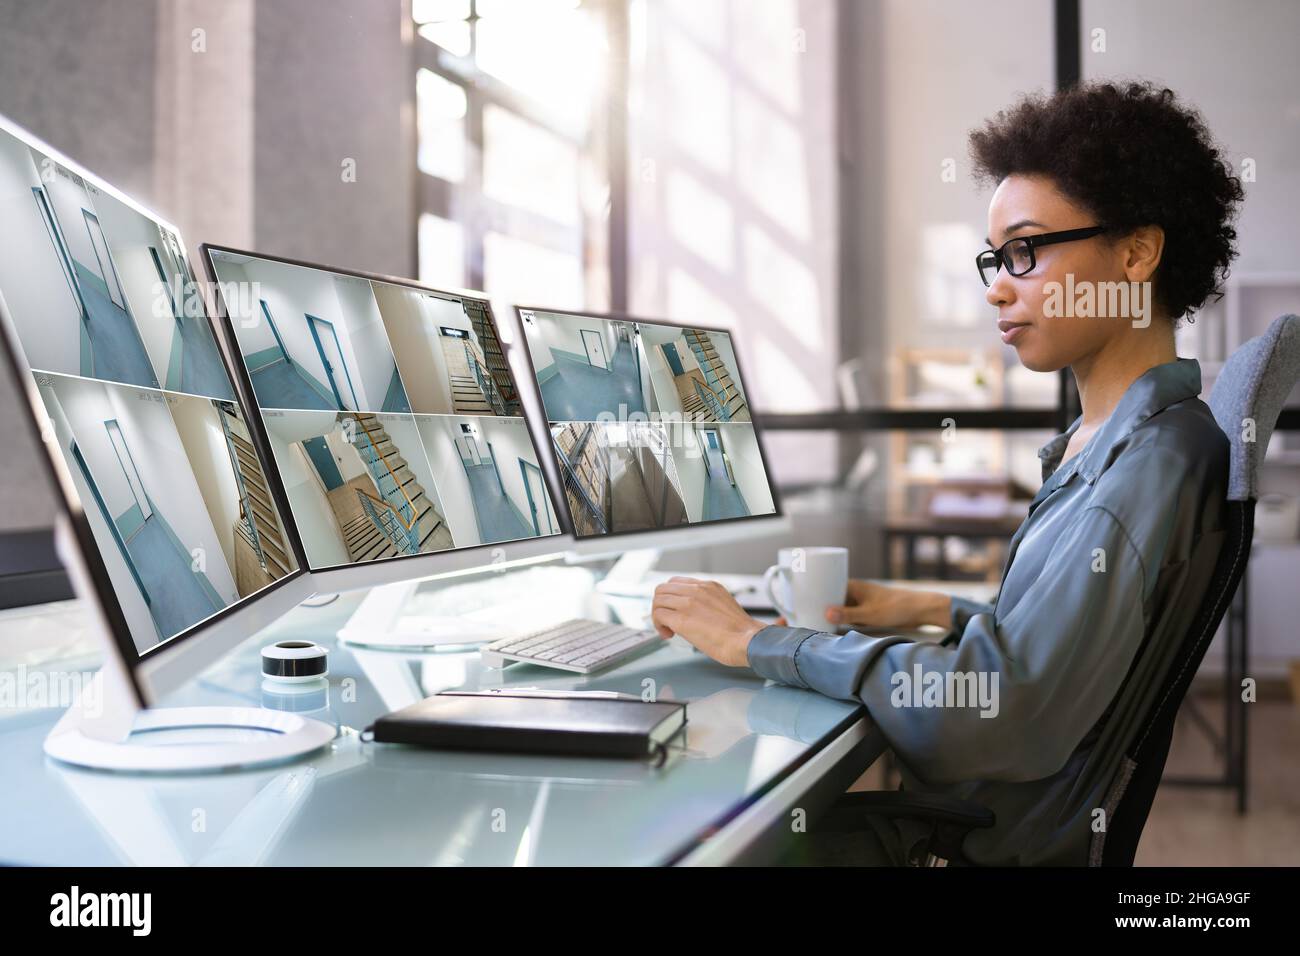 Office Security System And Video Cameras Management Stock Photo